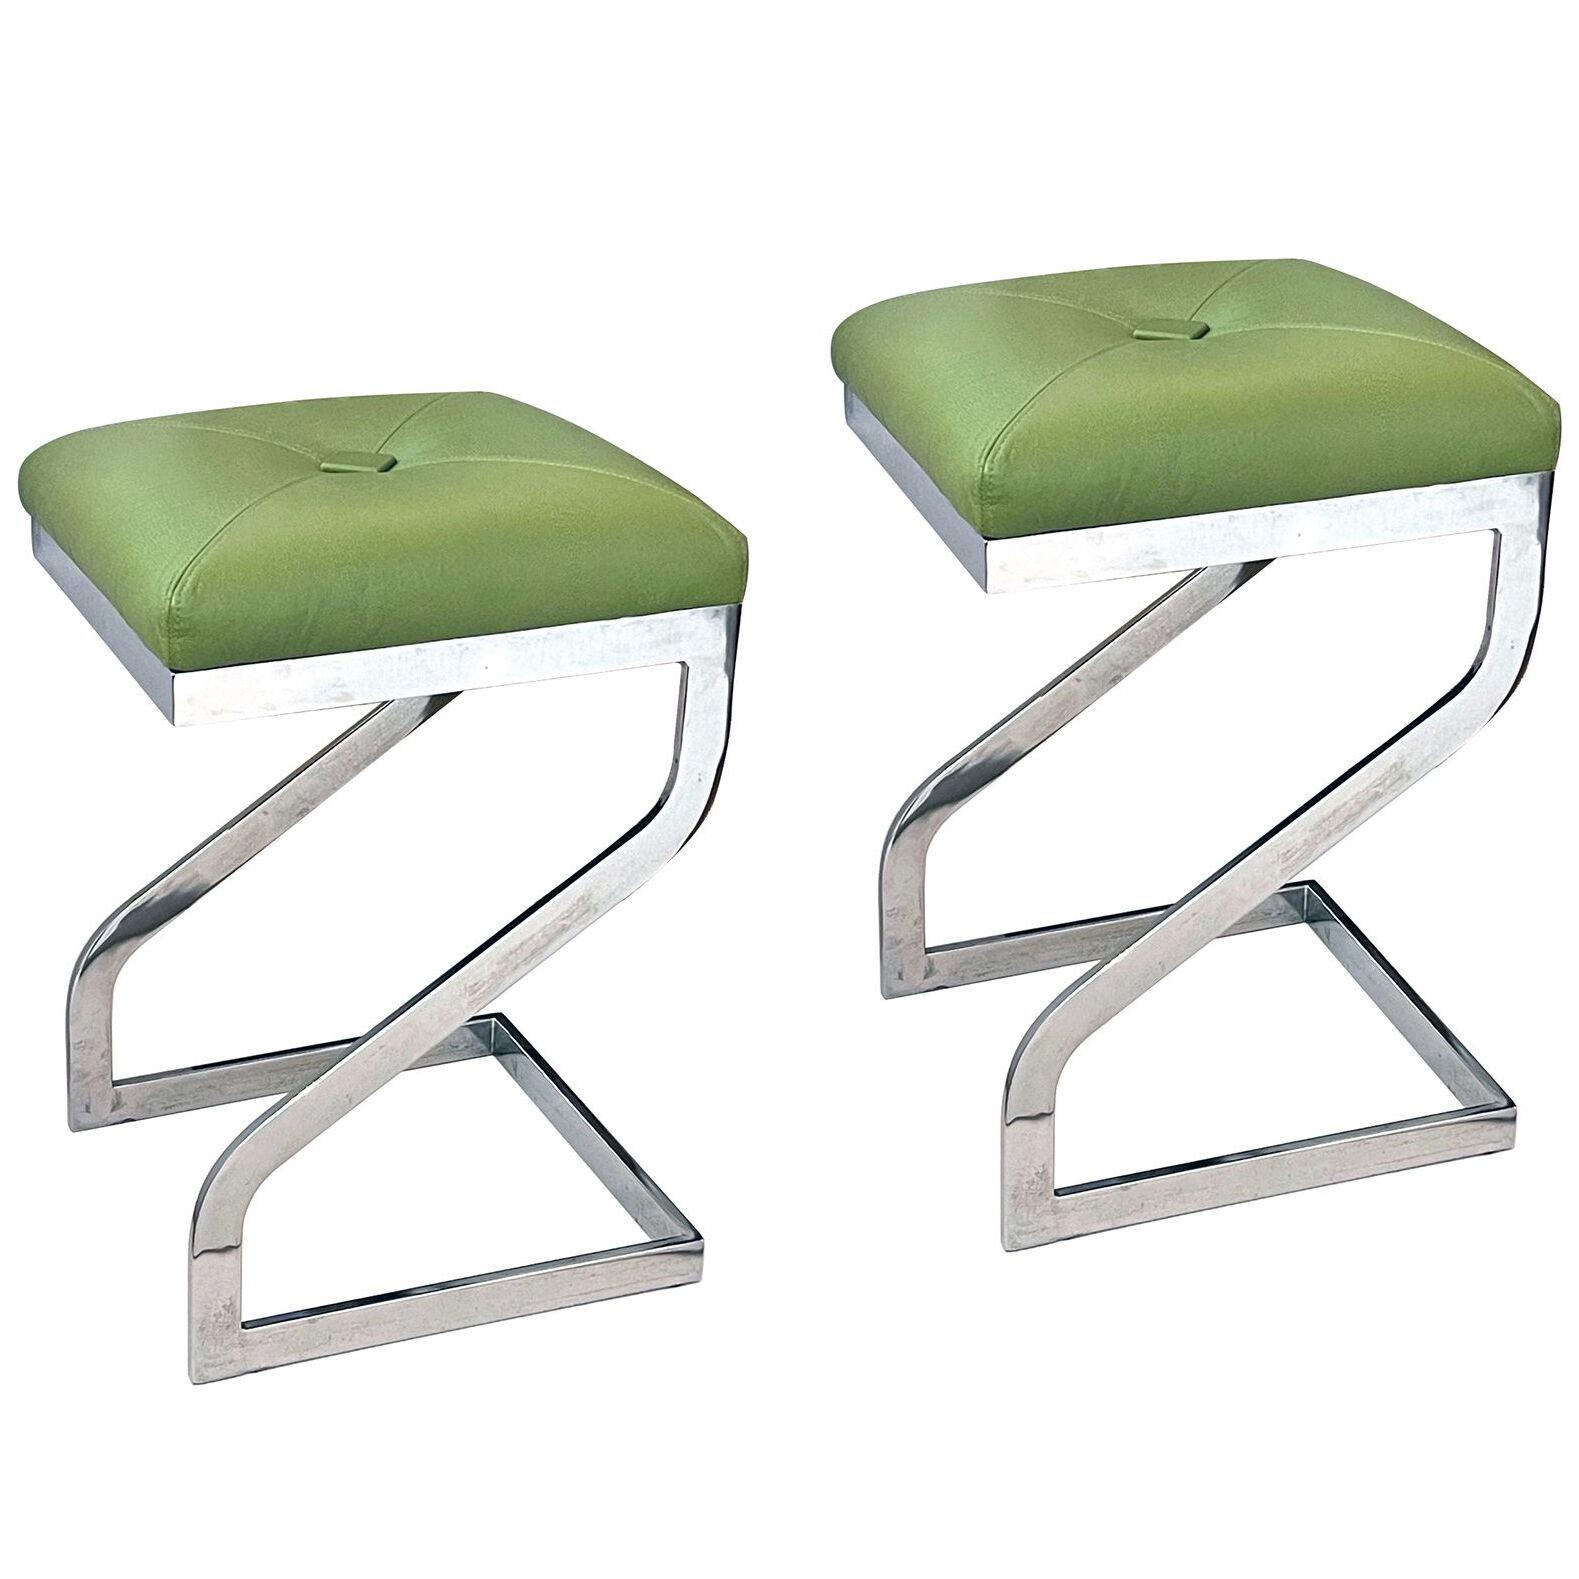 Pair of 1970's z-form chrome bar stools with apple green leather upholstery